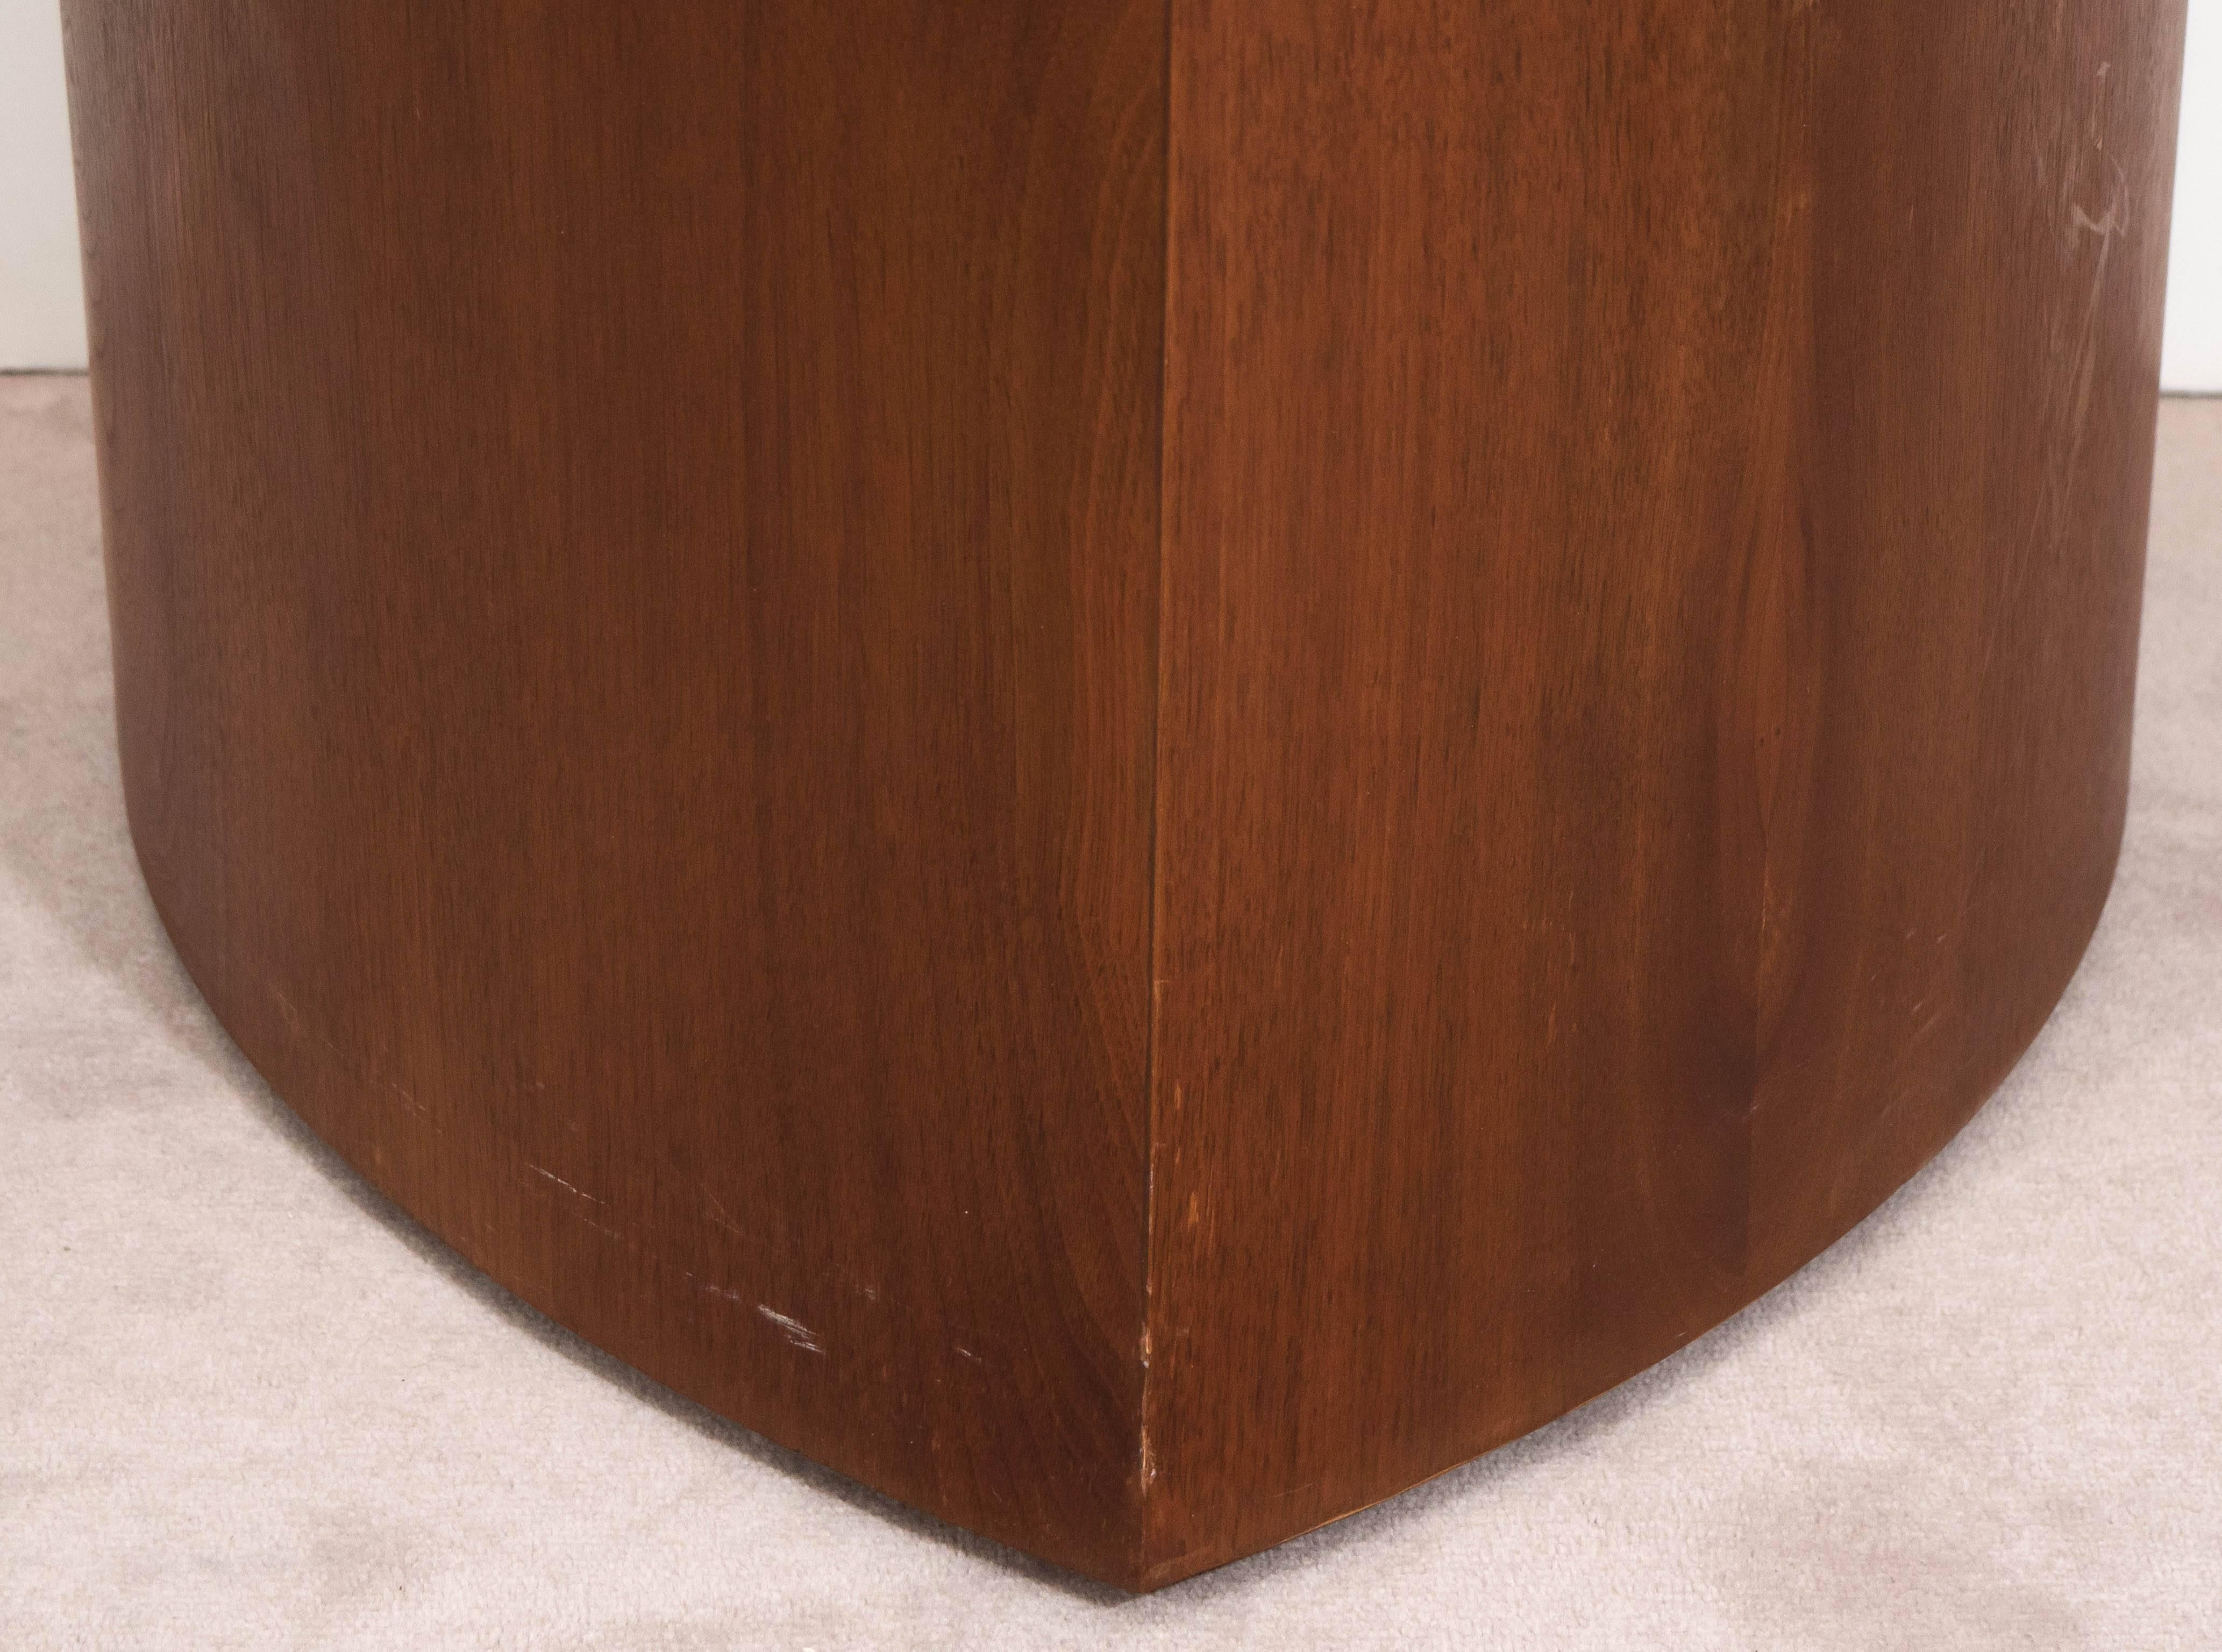 This end and side accent table, produced, circa 1960s, includes triangular top in Italian travertine, on wedge form base in walnut, top detached from base. The table remains in very good condition, with minor presence of wear and scuffing to wood